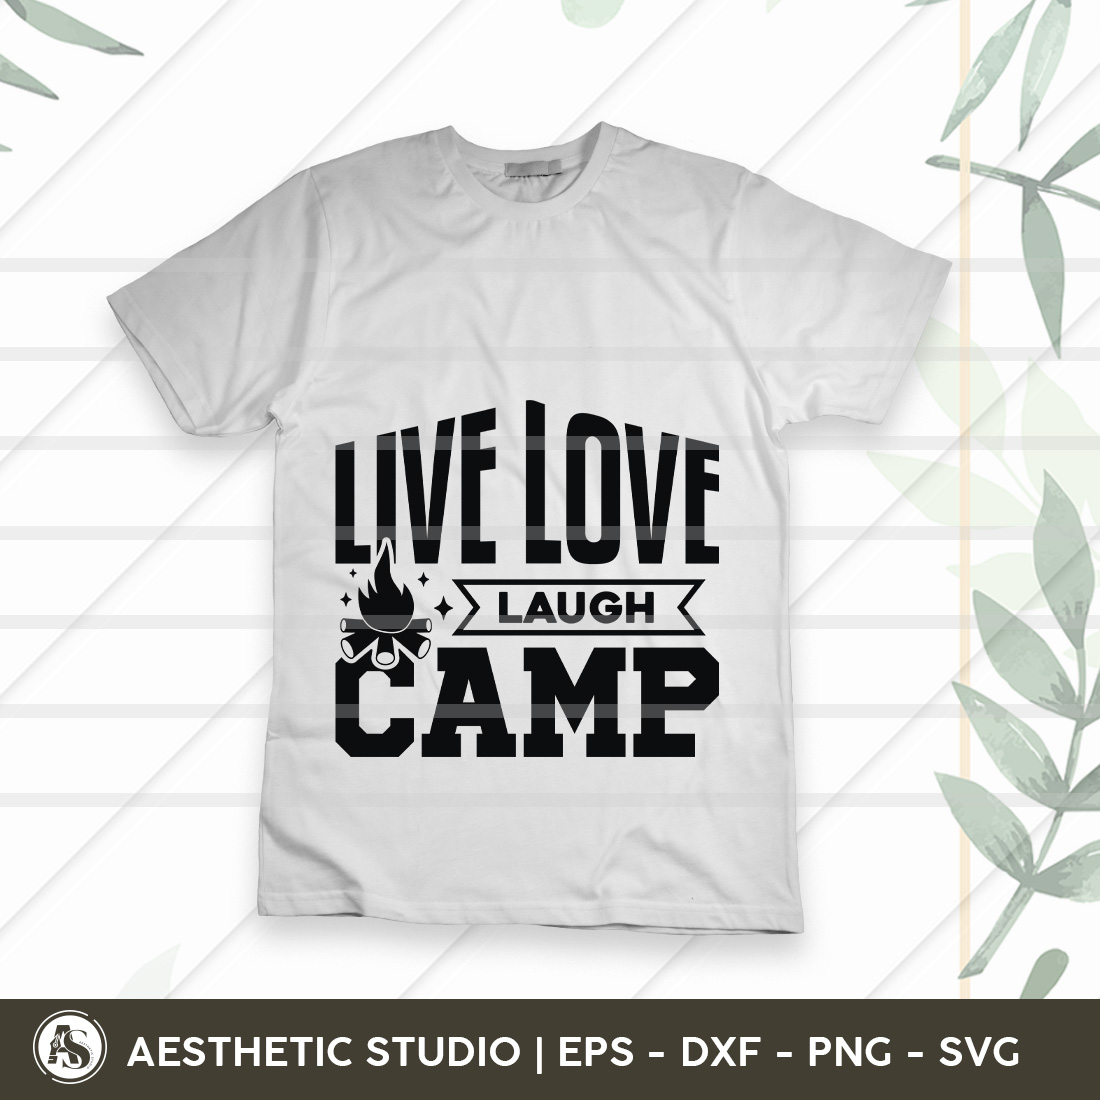 Live Love Laugh Camp, Adventure, Camp Life, Camping Svg, Typography, Camping Quotes, Camping Cut File, Funny Camping, Camping T-shirt Design, Svg, Eps, Dxf, Png, Cut file preview image.